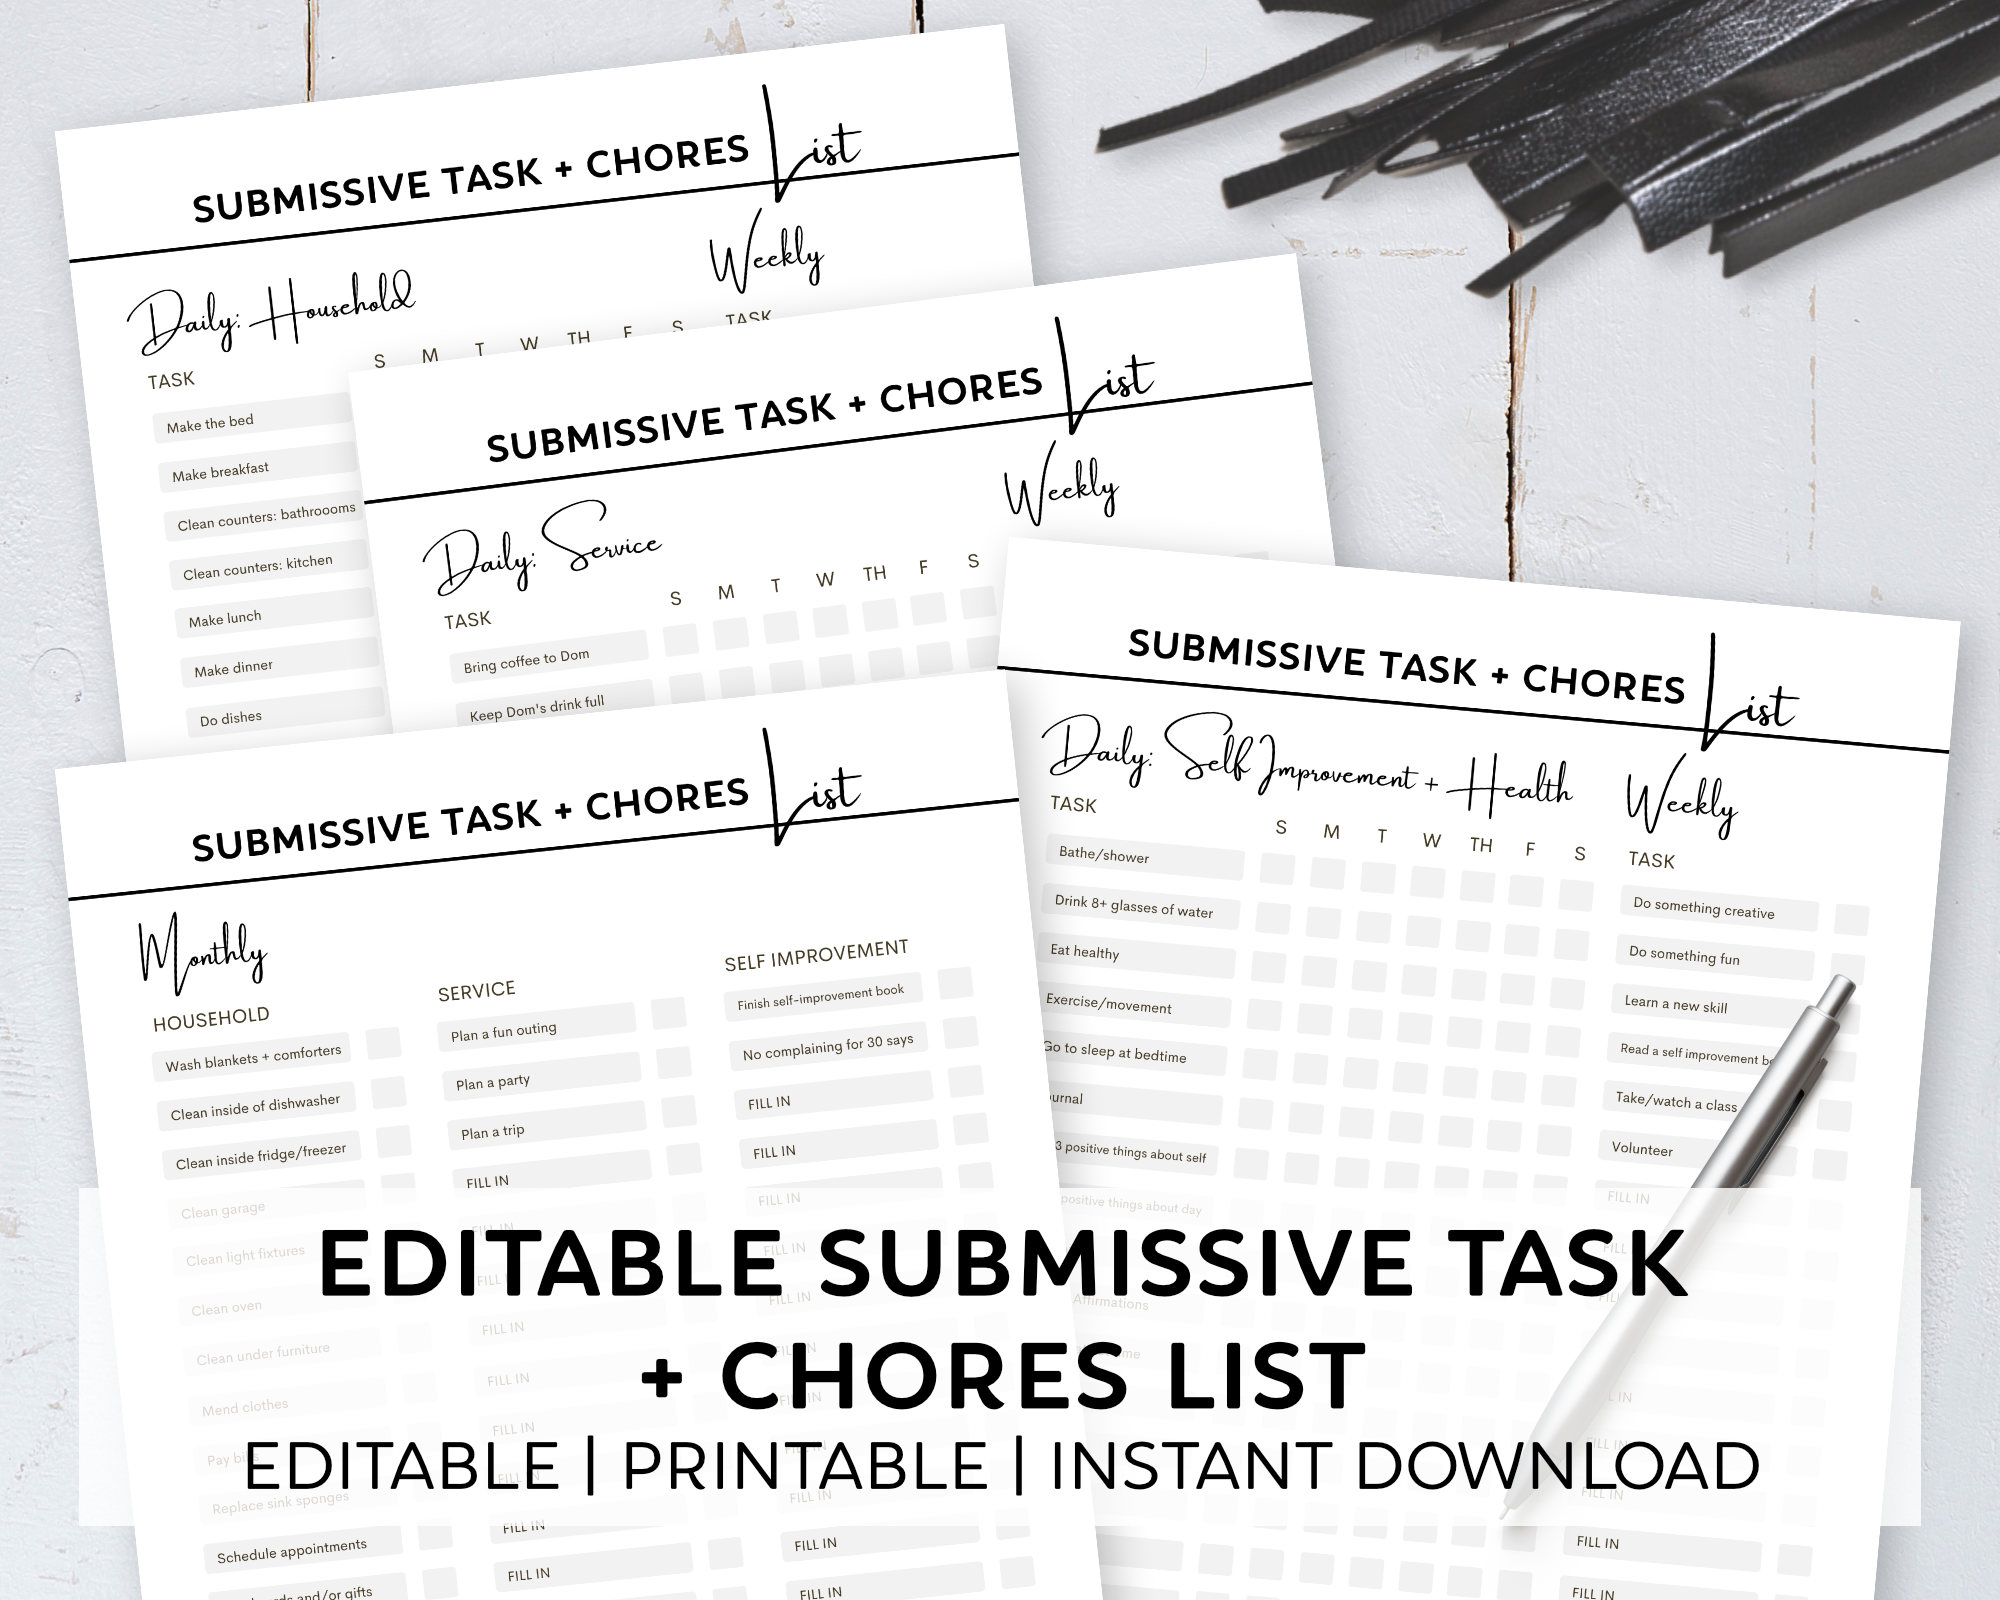 Editable Submissive Task and Chores Household, Service and Self Improvement List Kinky Ink Press pic